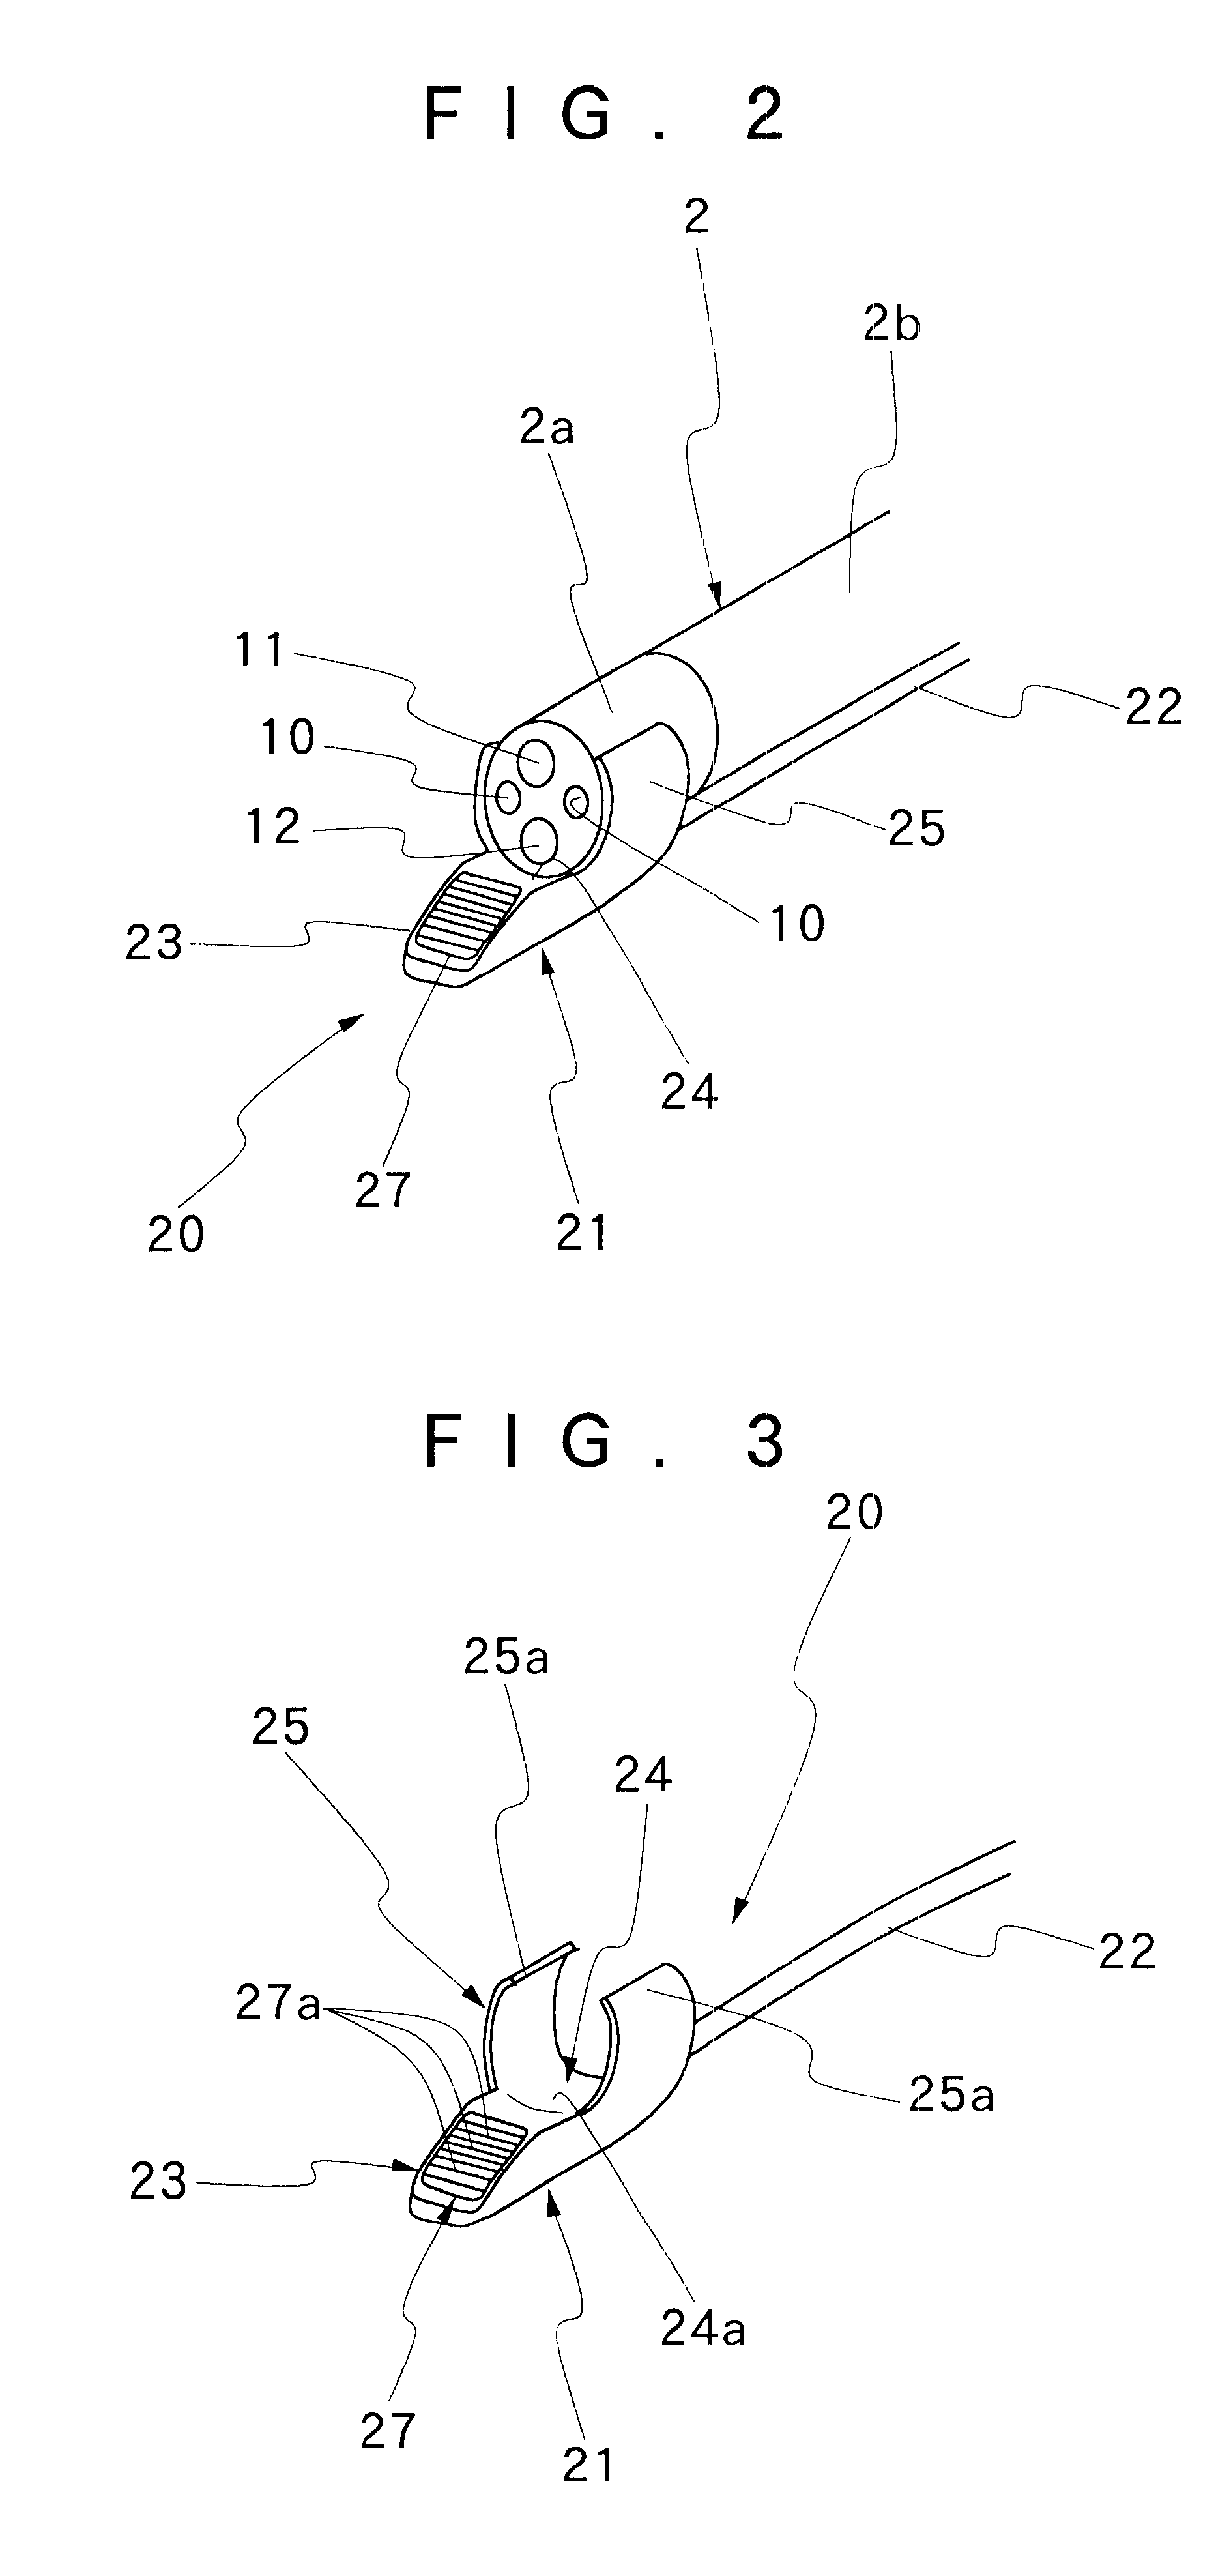 Ultrasound inspection apparatus detachably connected to an endoscope